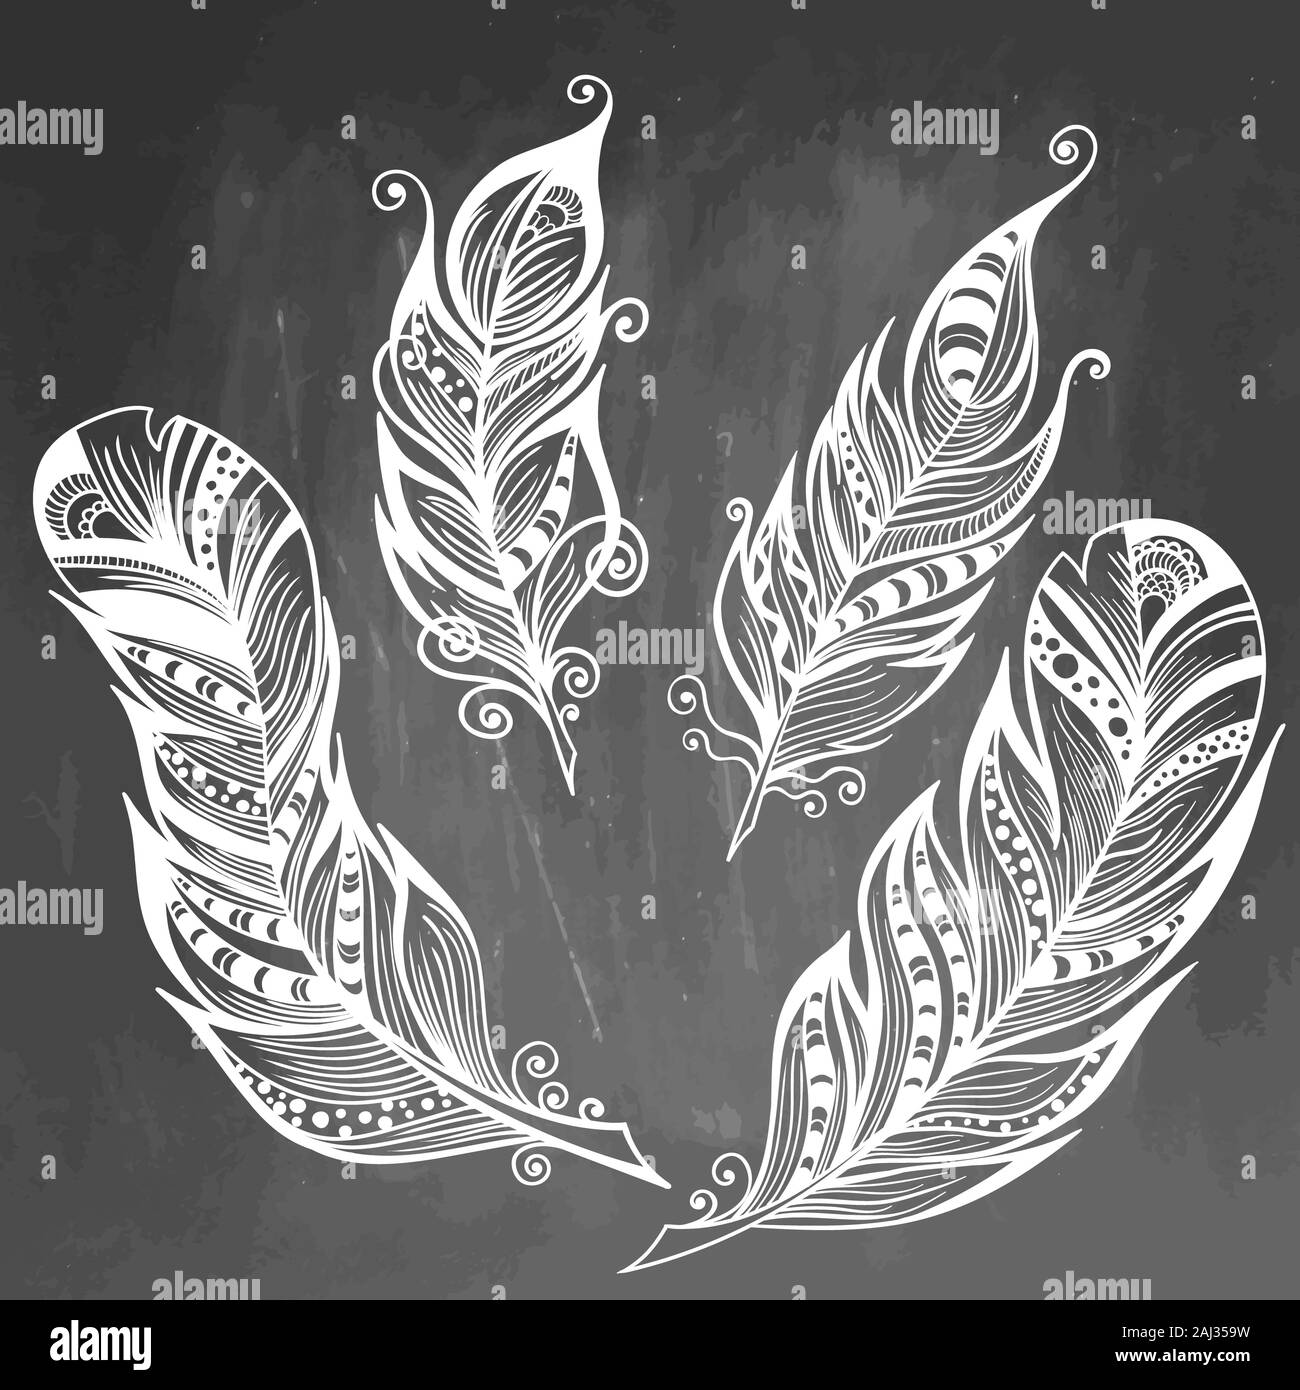 Feather hand drawn illustration. Sketch collection. Engraved style set of doodle plumes on chalkboard background. Stock Photo